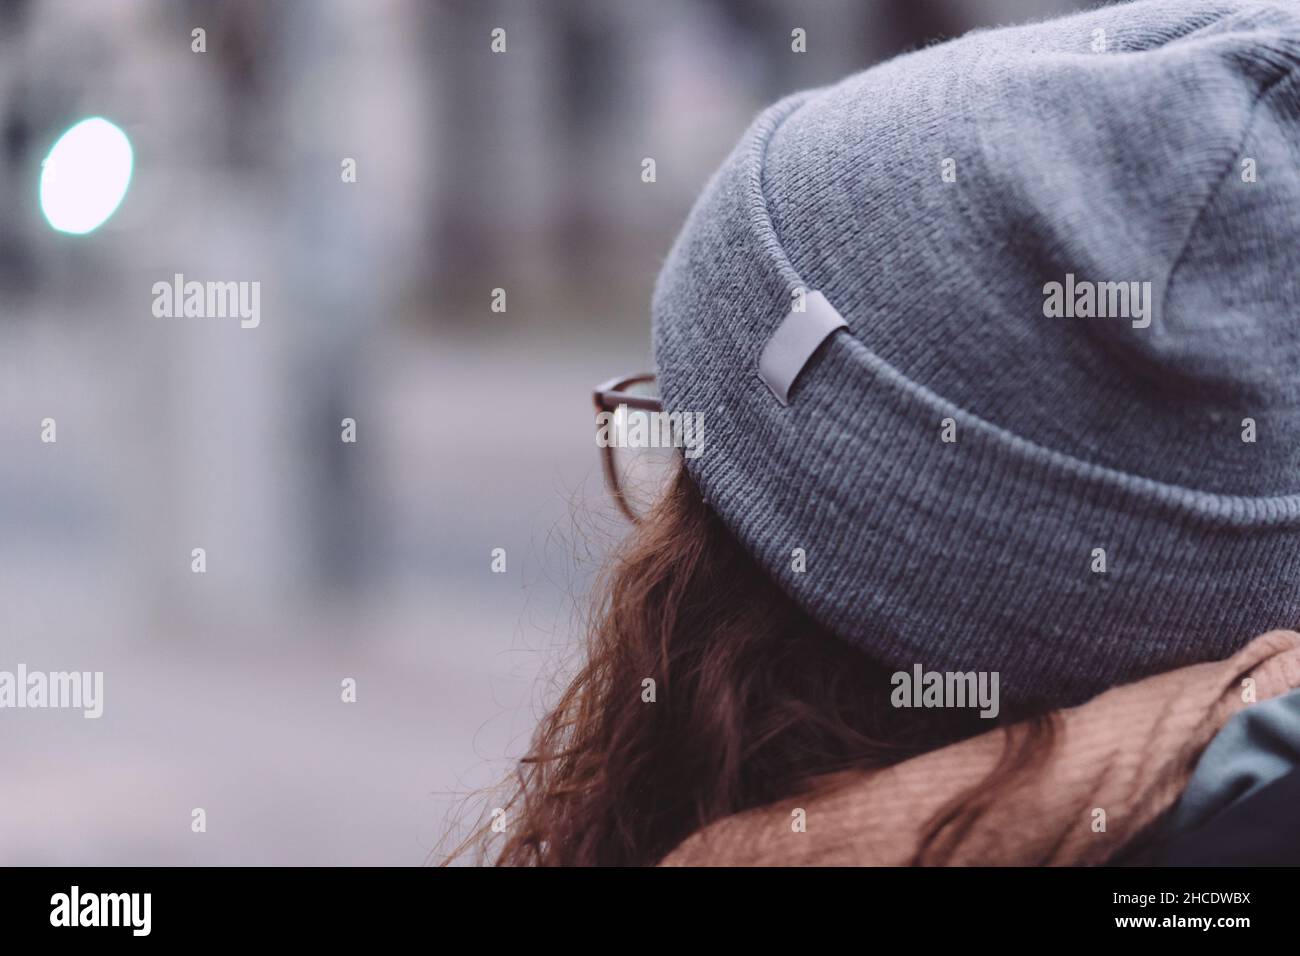 Rear view of a redhead lady wearing glasses, a hat, and a scarf outdoors Stock Photo